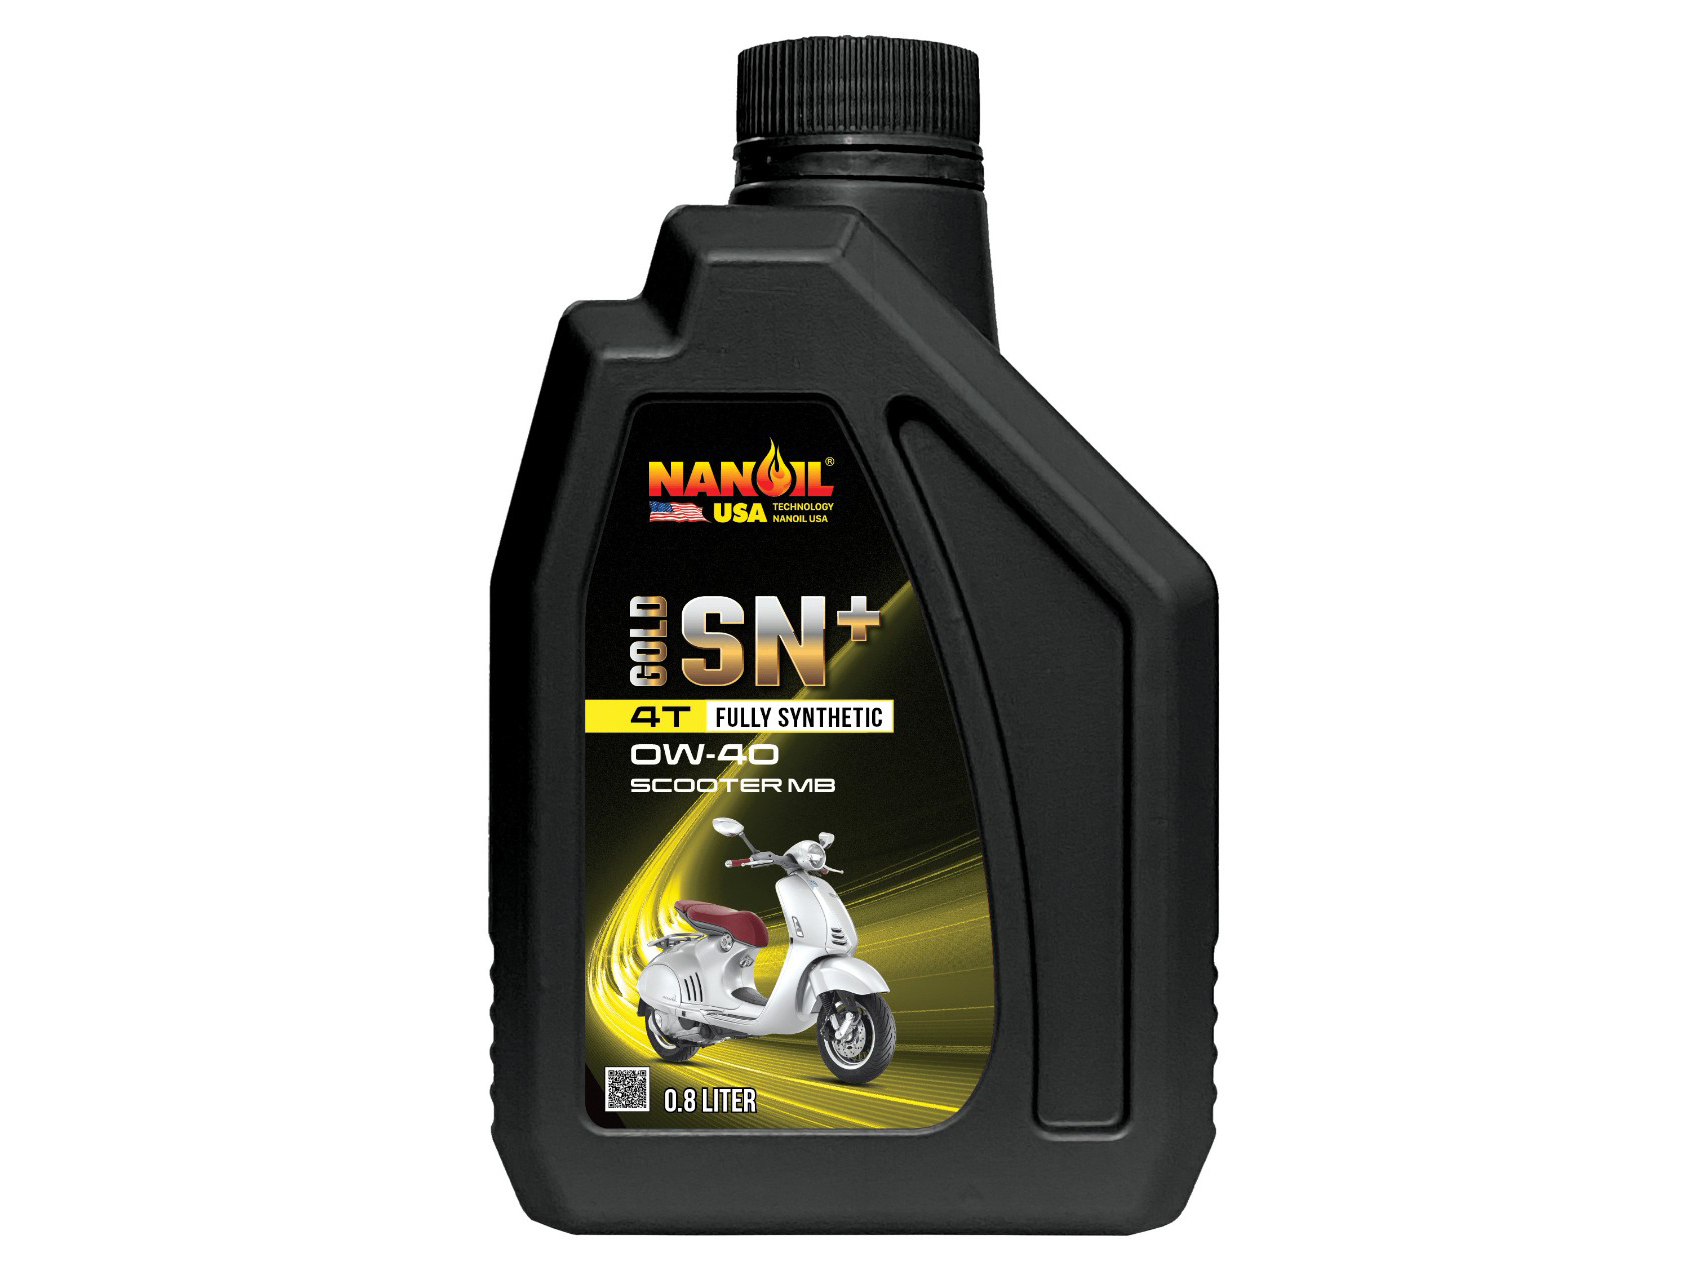 Nanoil USA Fully Synthetic Gold SN+ Scooter